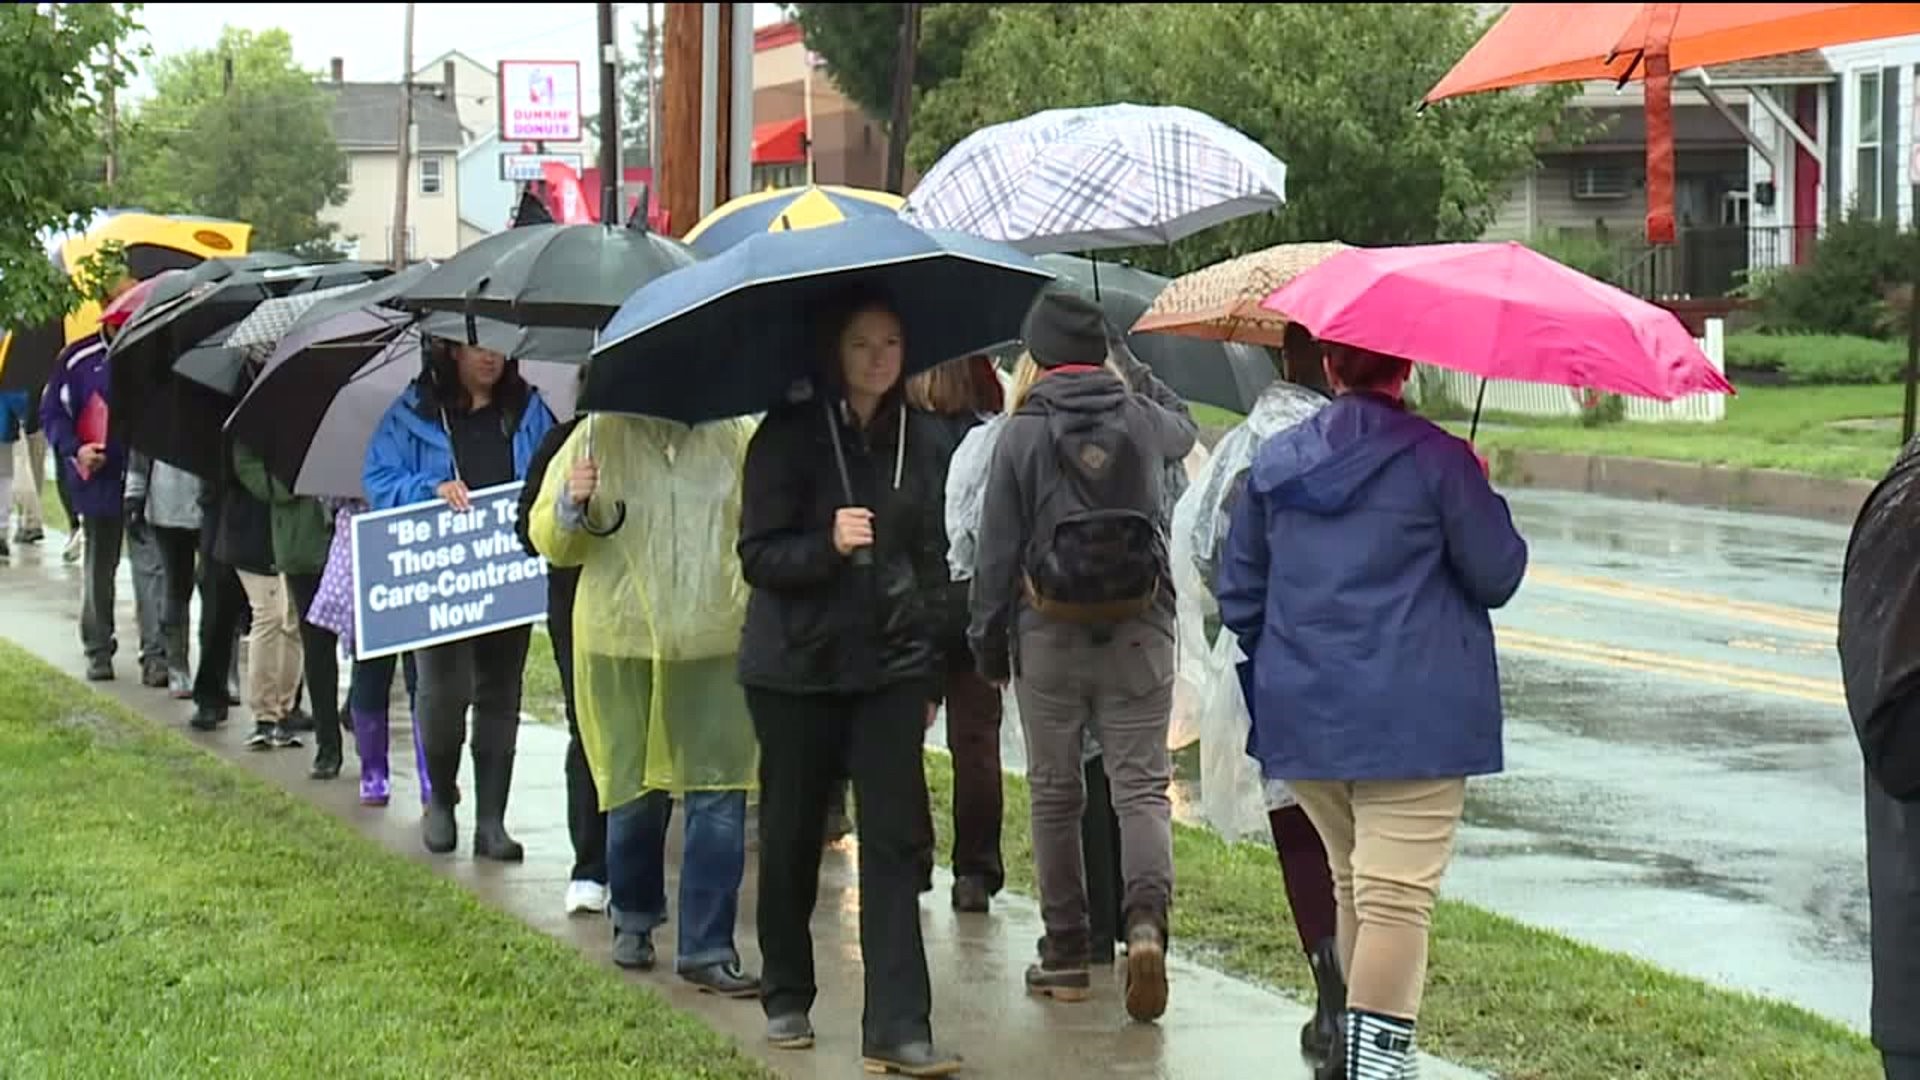 No Deal Reached, Strike Continues in East Stroudsburg Area School